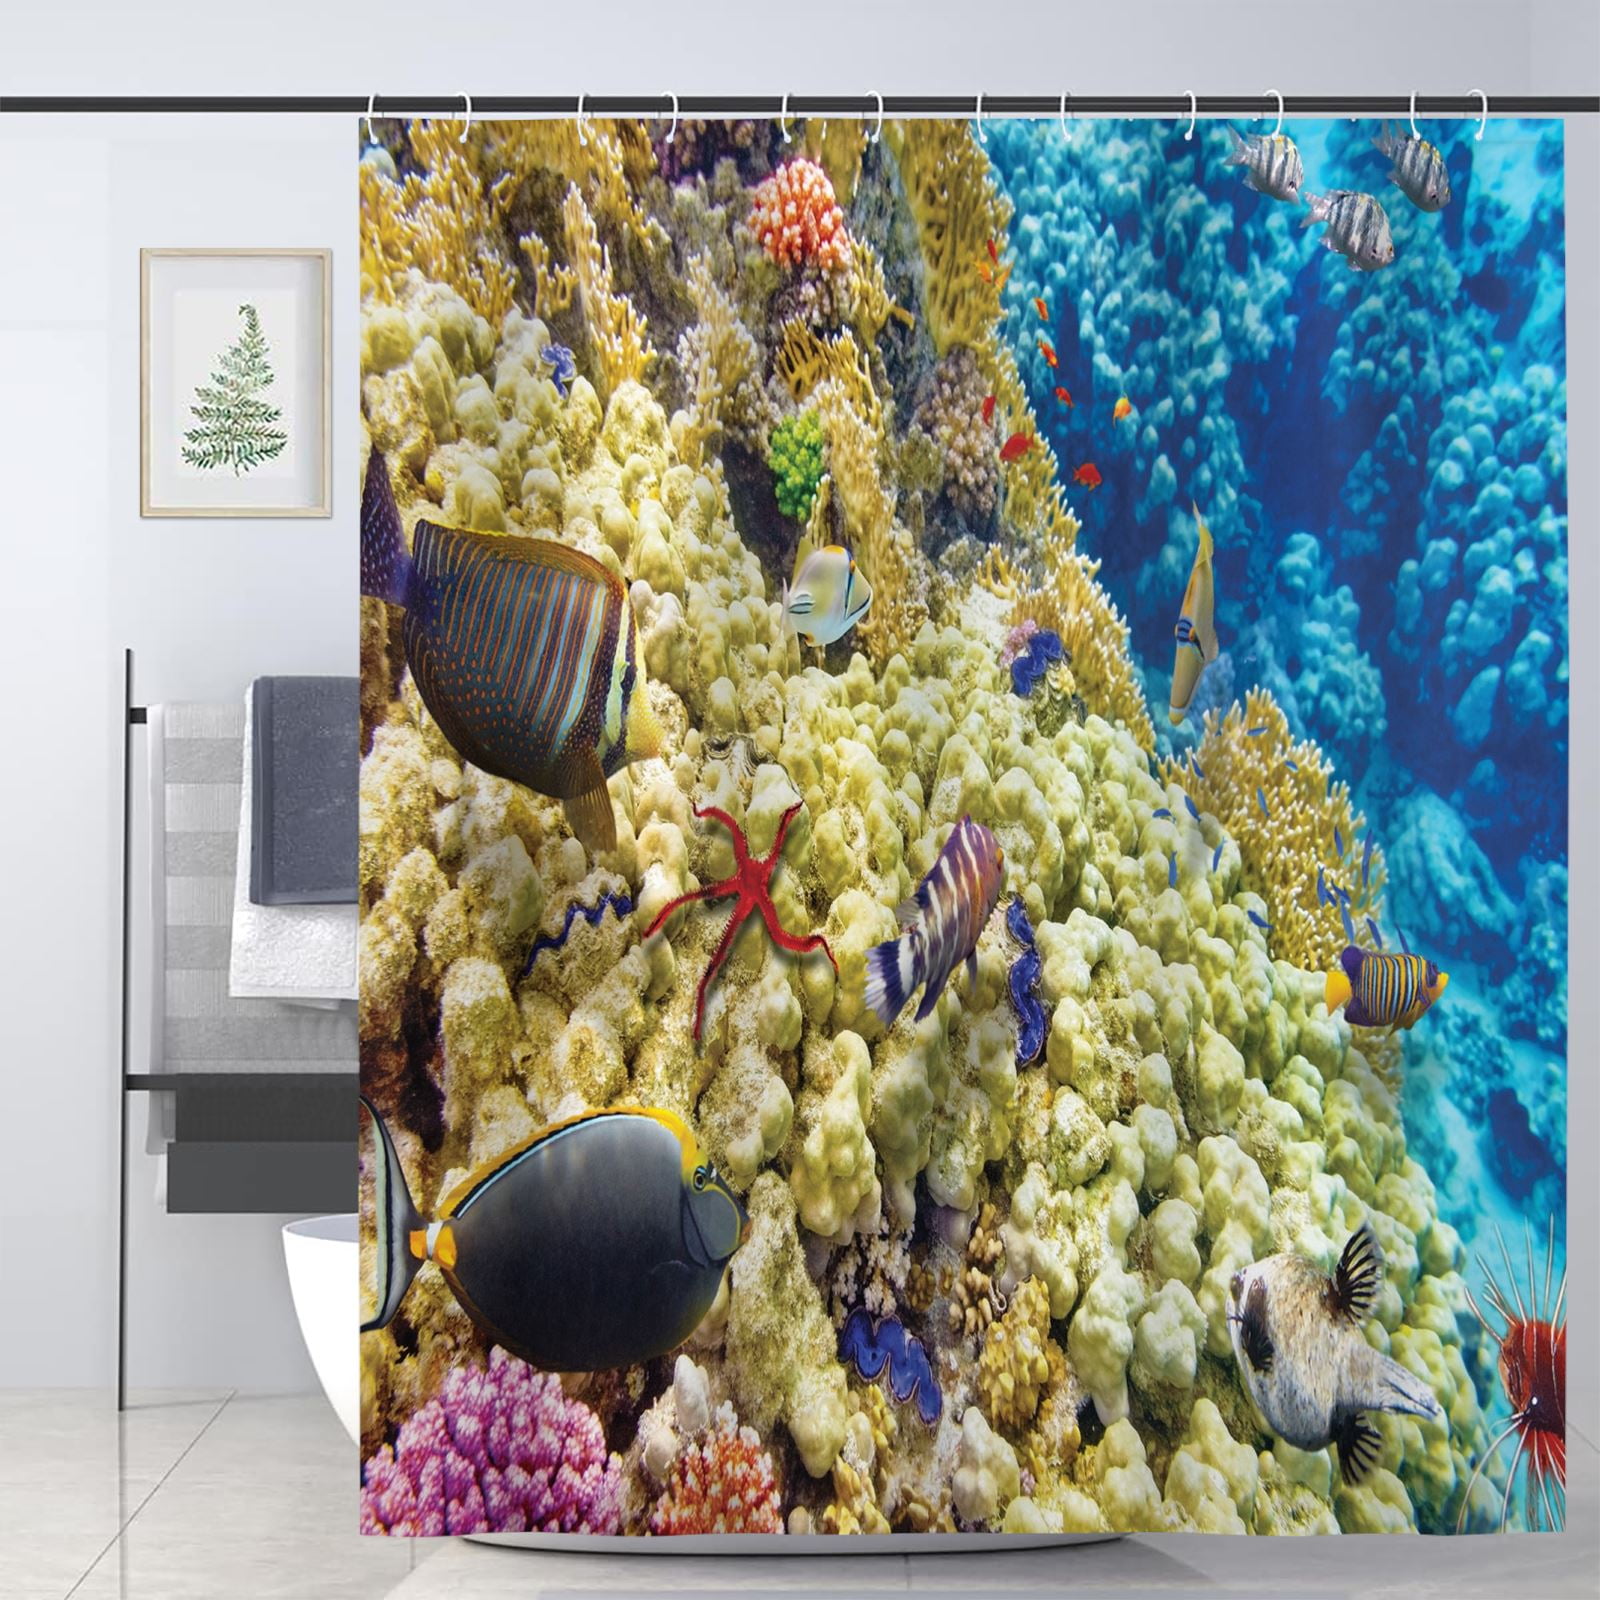 72x72" Fabric Shower Curtain Set Underwater World with Fish and Plants Anemones 